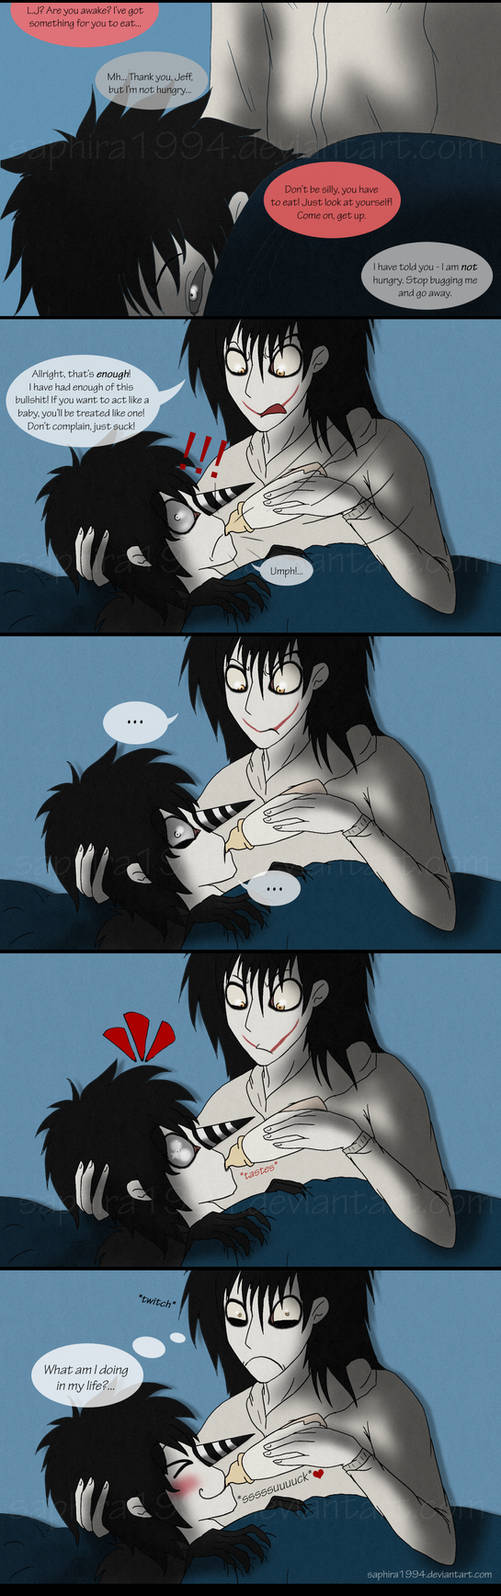 Jeff the killer story comic-Pag.1 by DeluCat on DeviantArt